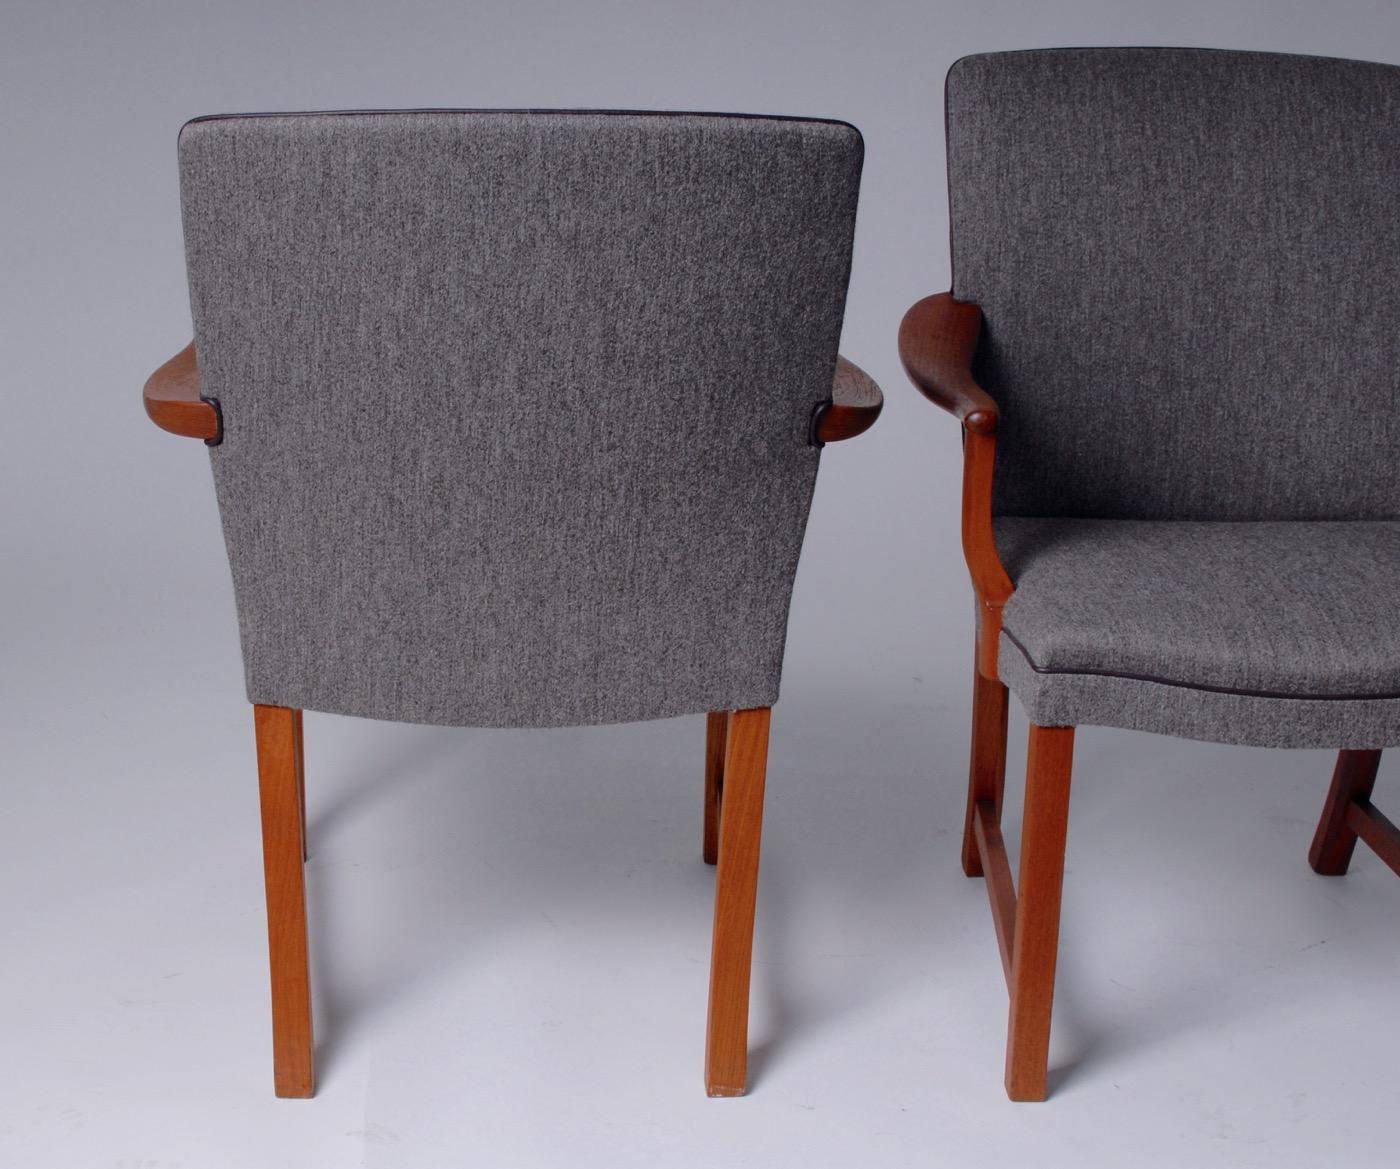 Midcentury Scandinavian Modern Alf Sture Armchairs Teak and Wool Norway, 1950 In Good Condition For Sale In Oslo, NO